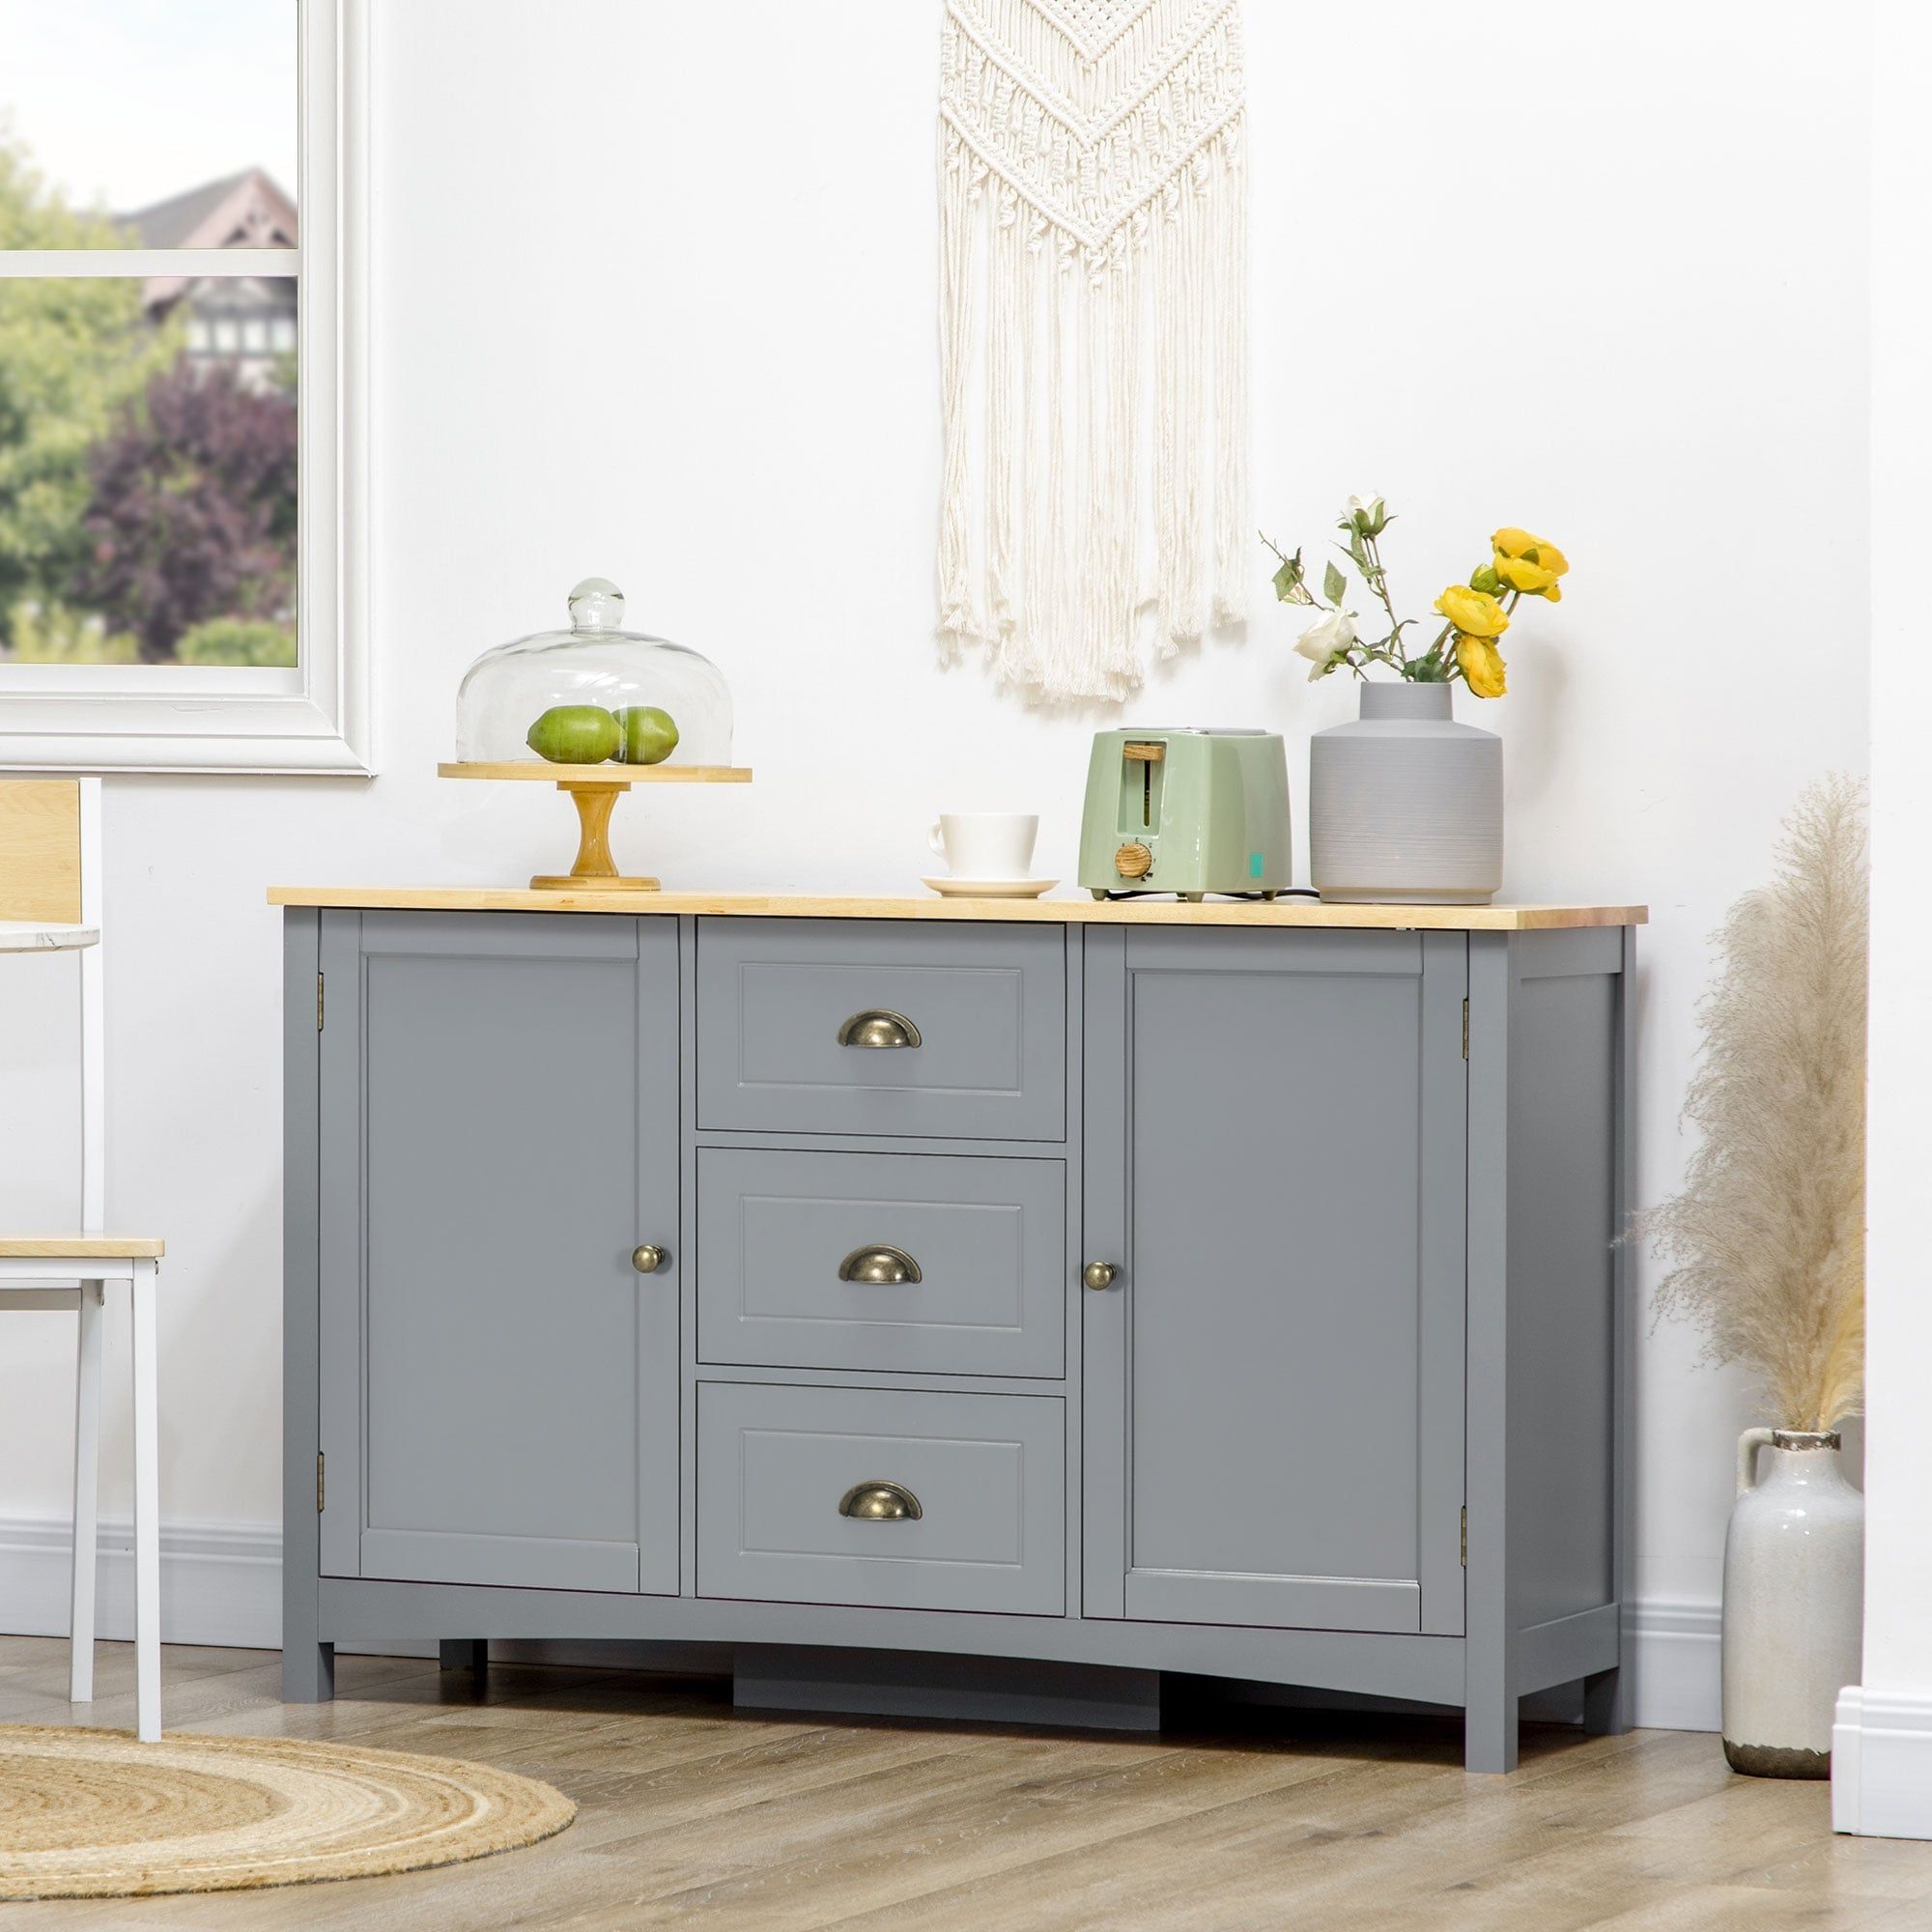 Sideboards With Rubberwood Top With Regard To Trendy Homcom Sideboard Buffet Cabinet, Retro Kitchen Cabinet, Coffee Bar Cabinet  With Rubber Wood Top, Drawers, Entryway, Gray – Bed Bath & Beyond –  (View 7 of 10)